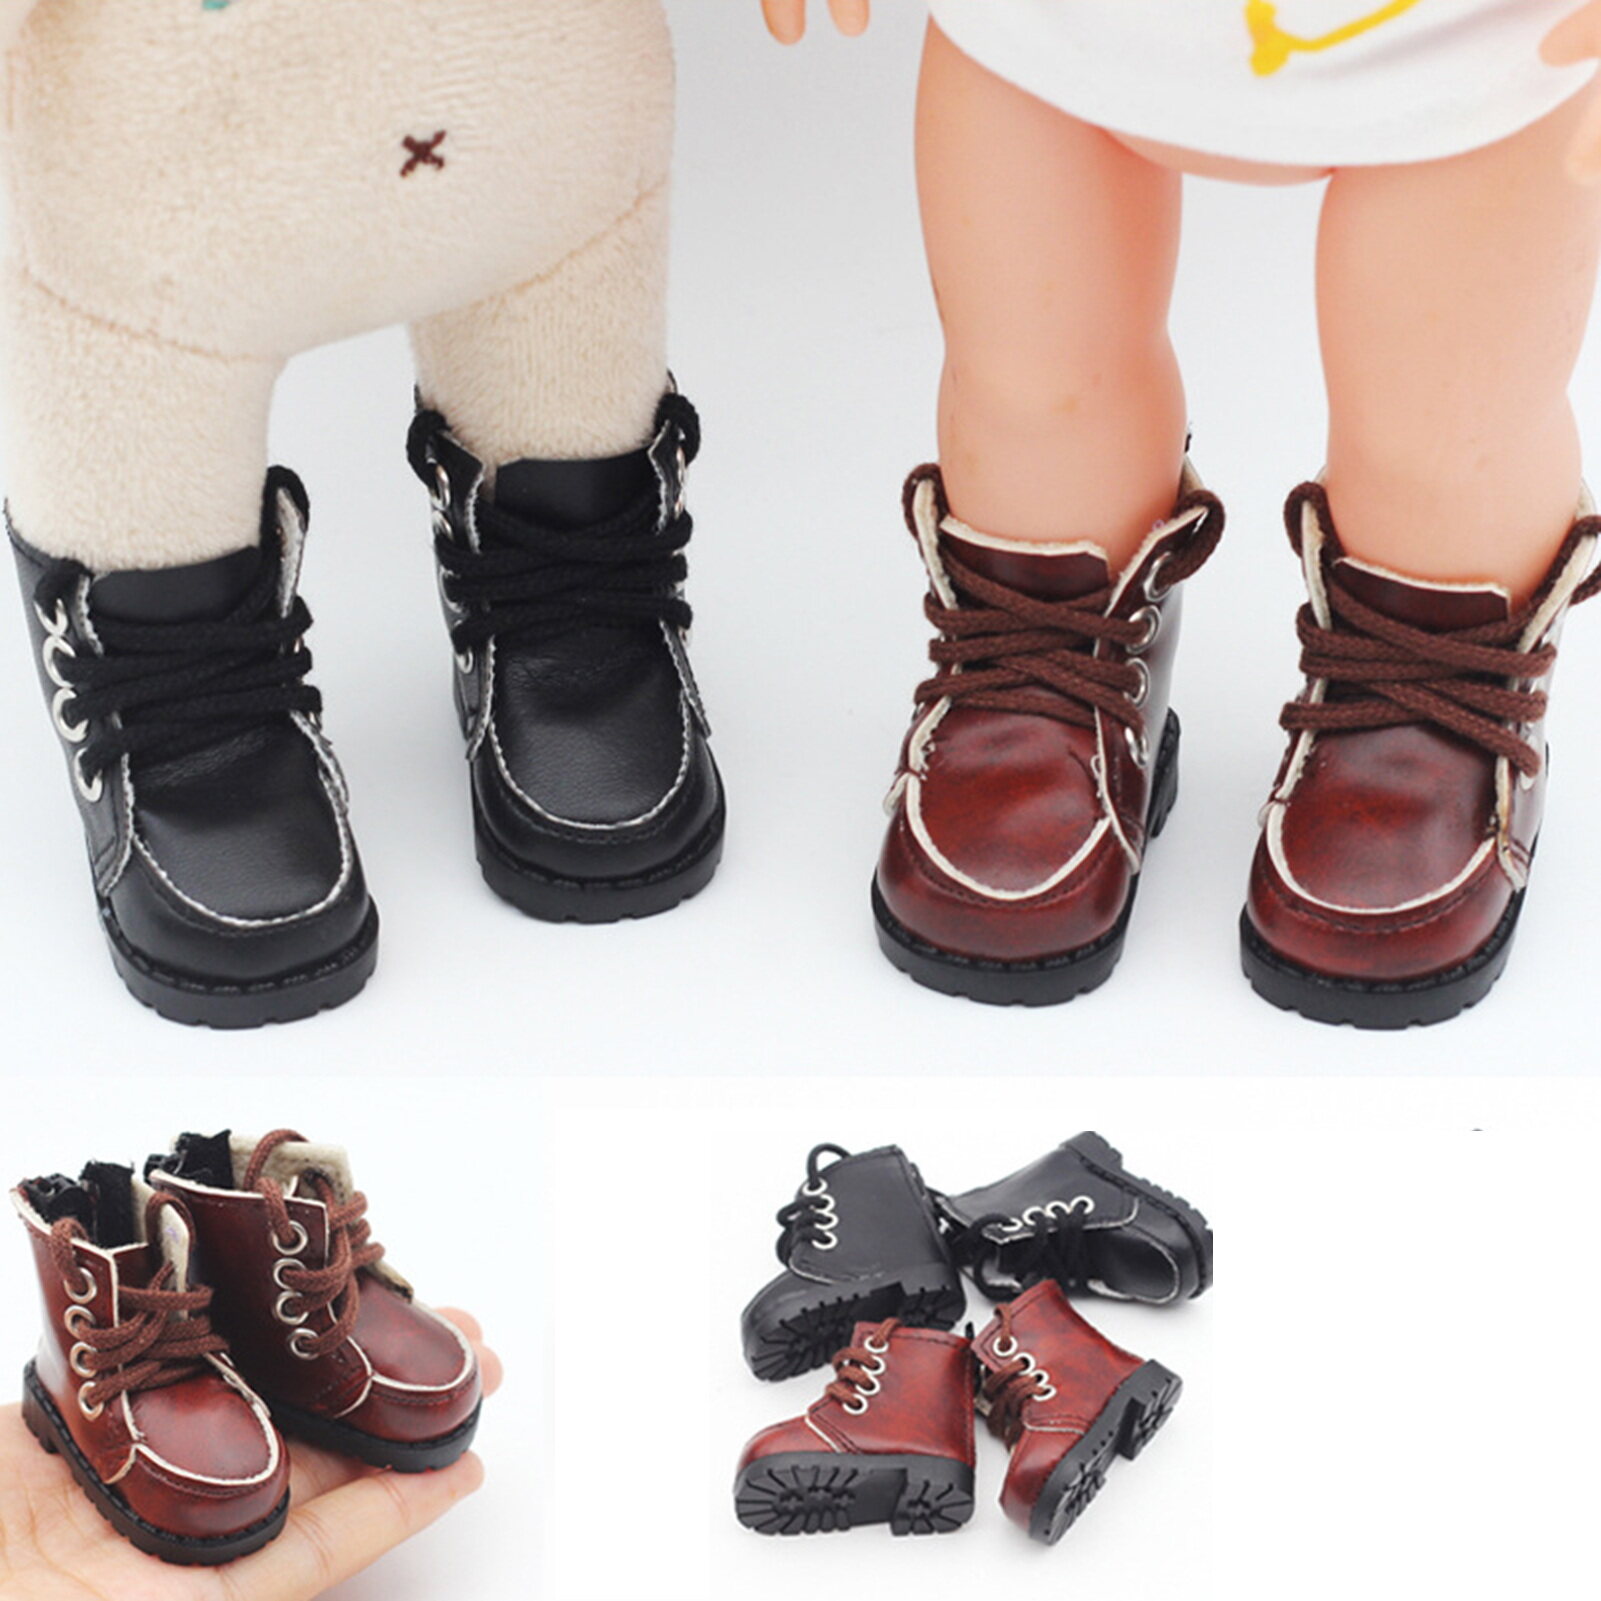 Norkee Soft and Realistic Doll Shoes Doll Shoes Soft and Highly Simulated